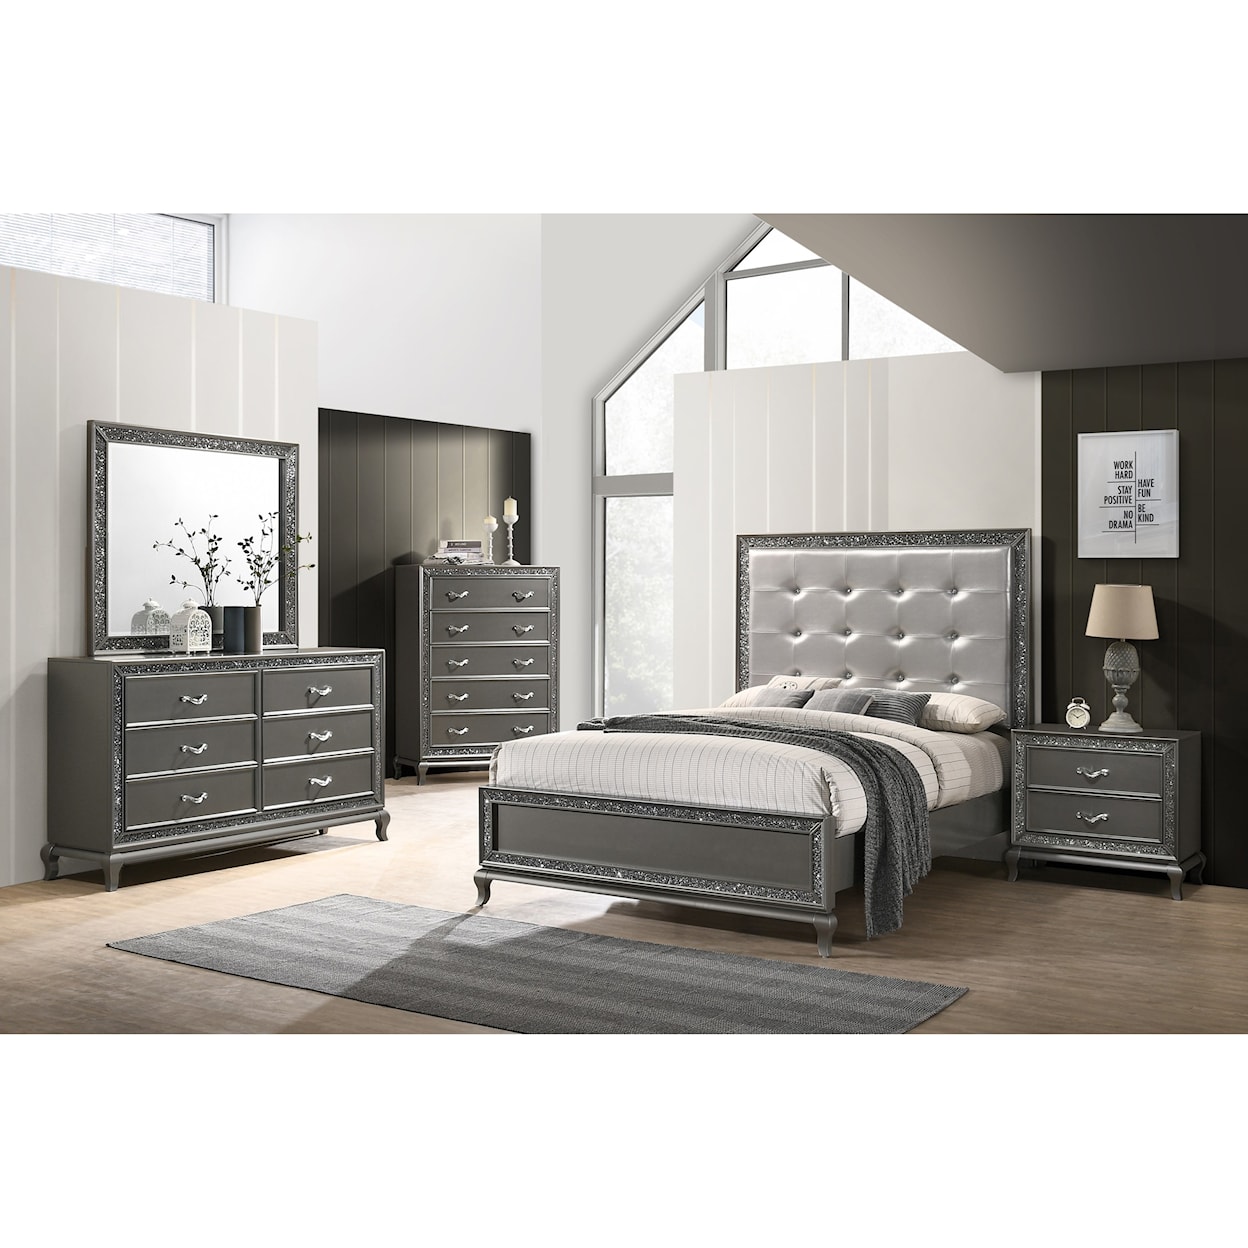 New Classic Furniture Park Imperial Queen Bedroom Group